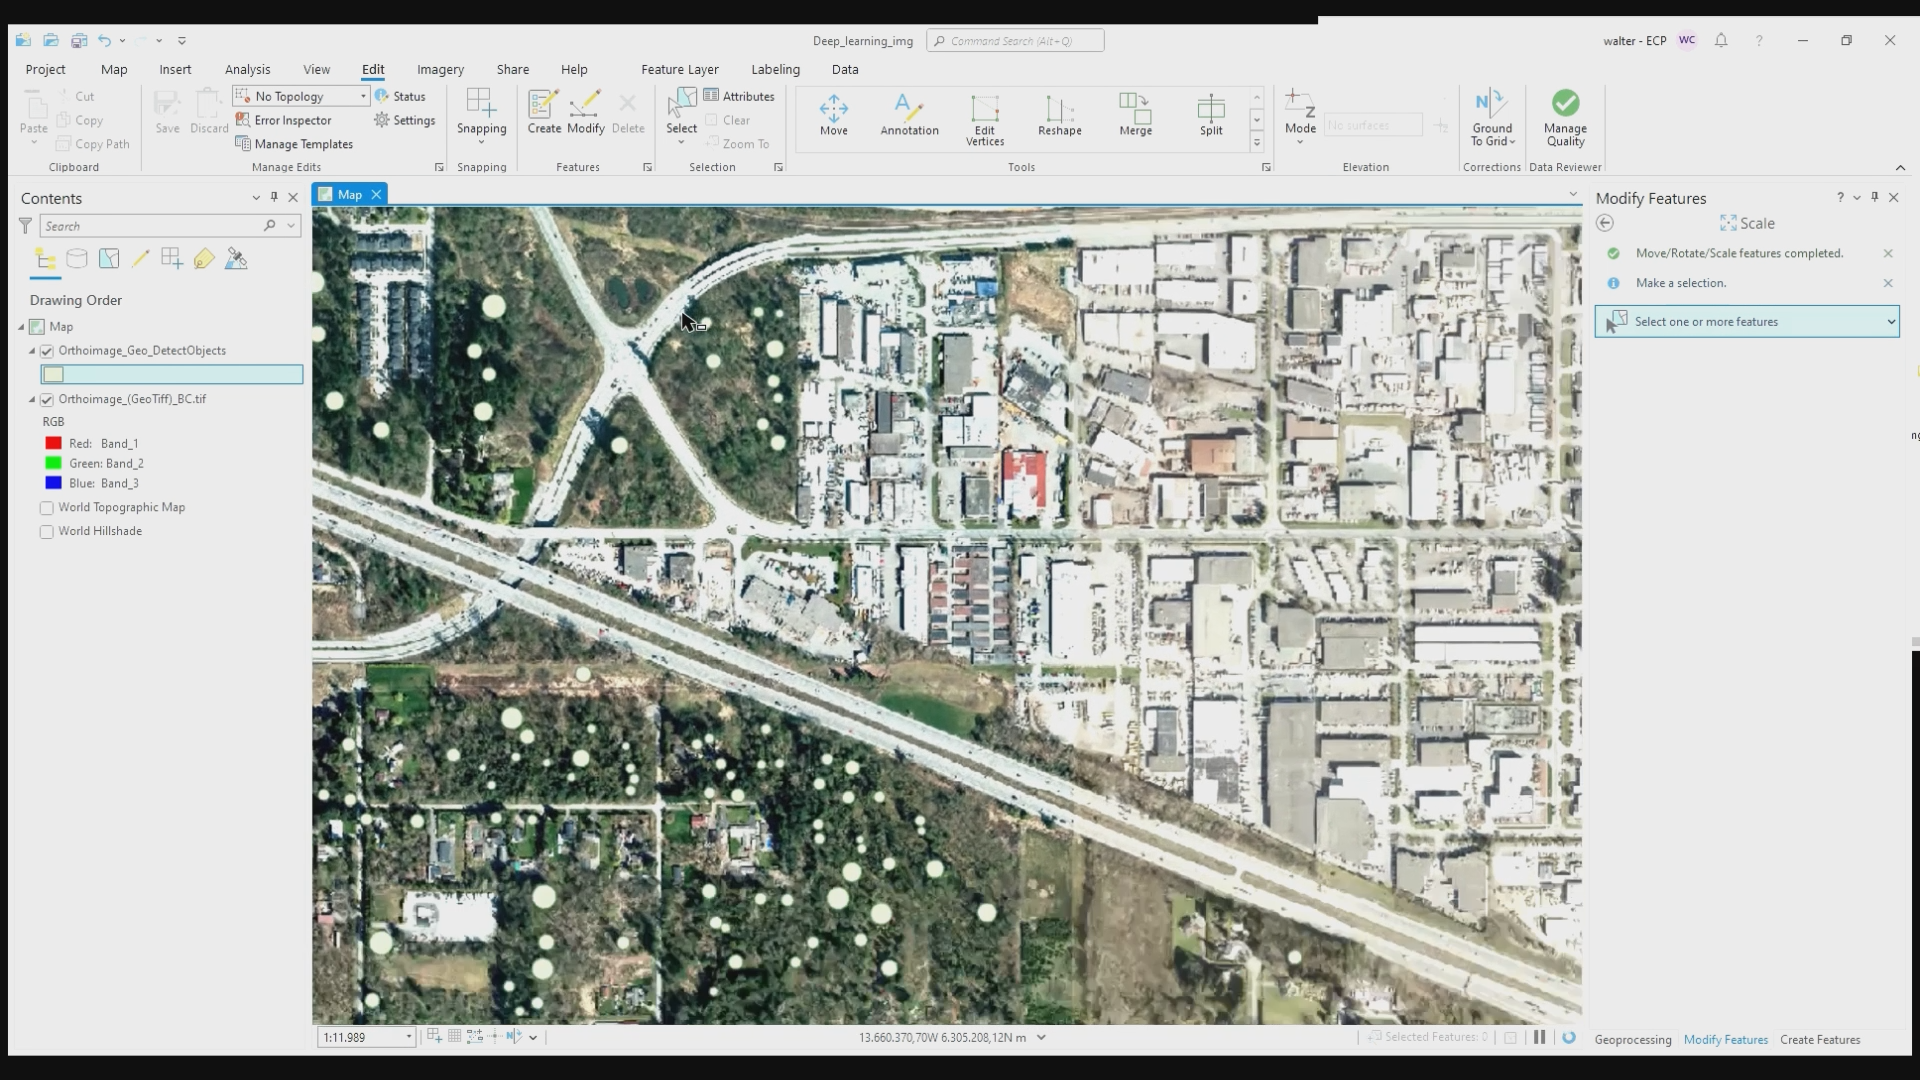 Detect Objects through Deep Learning in ArcGIS Pro - Results of the Training Model